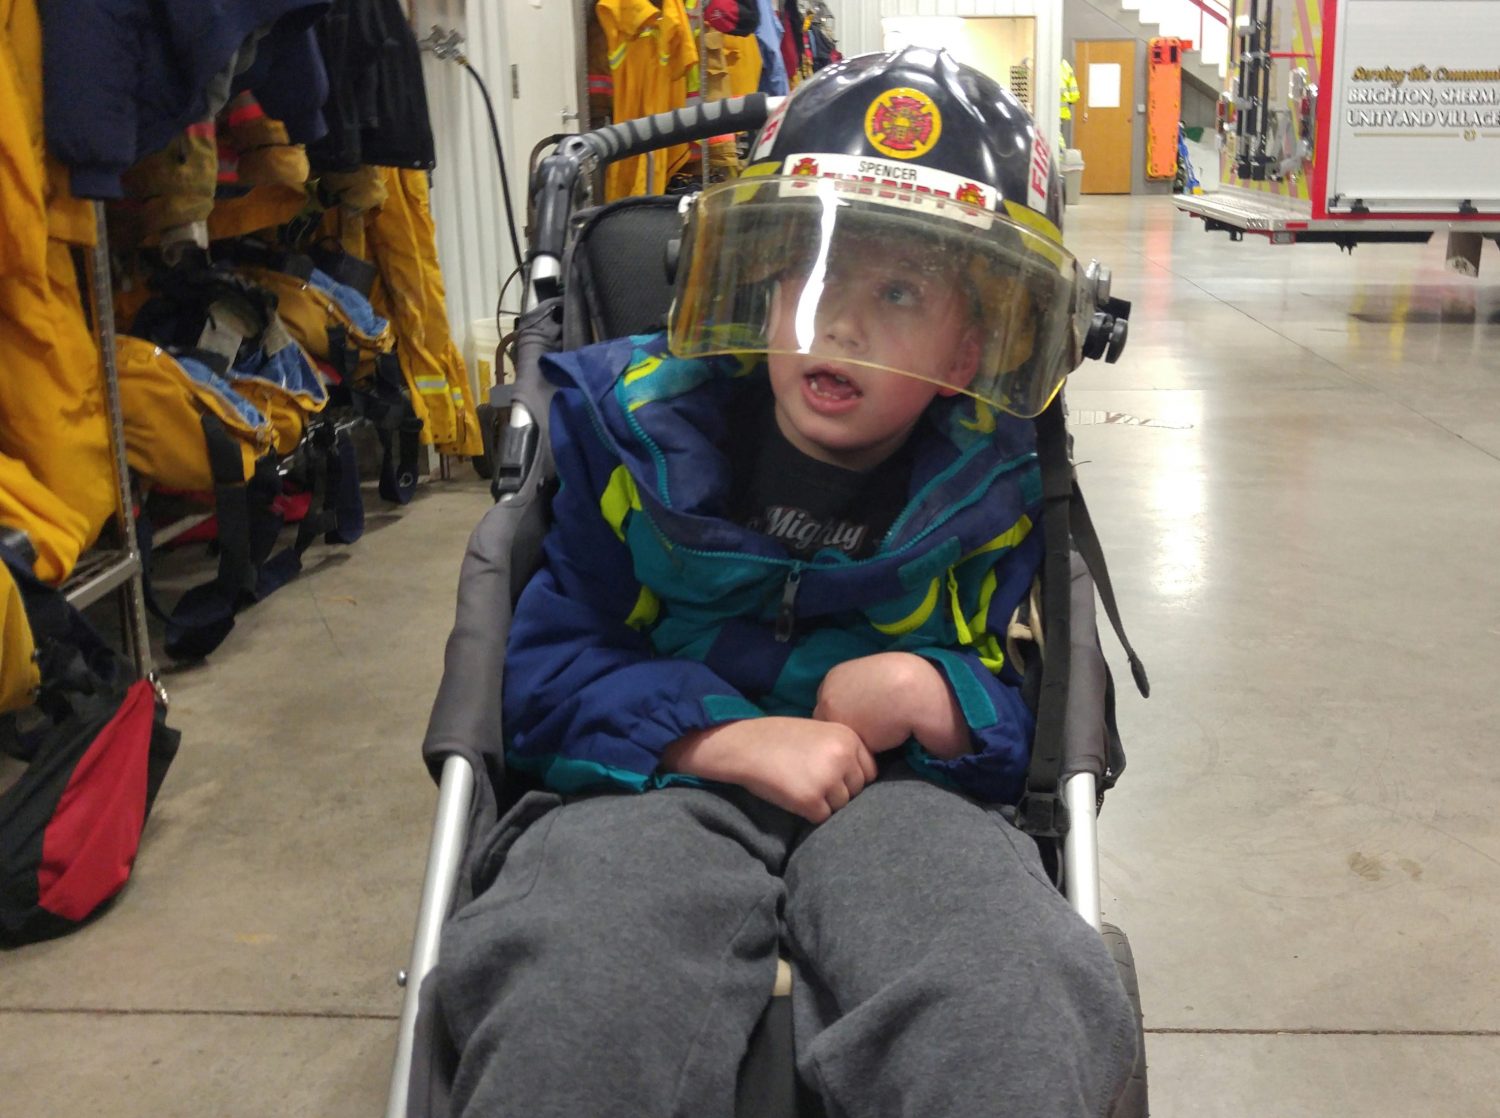 Cameron Krall's dream of riding in a fire truck was fulfilled with a tour of the Spencer Fire Department and ride around Spencer on Oct. 24.